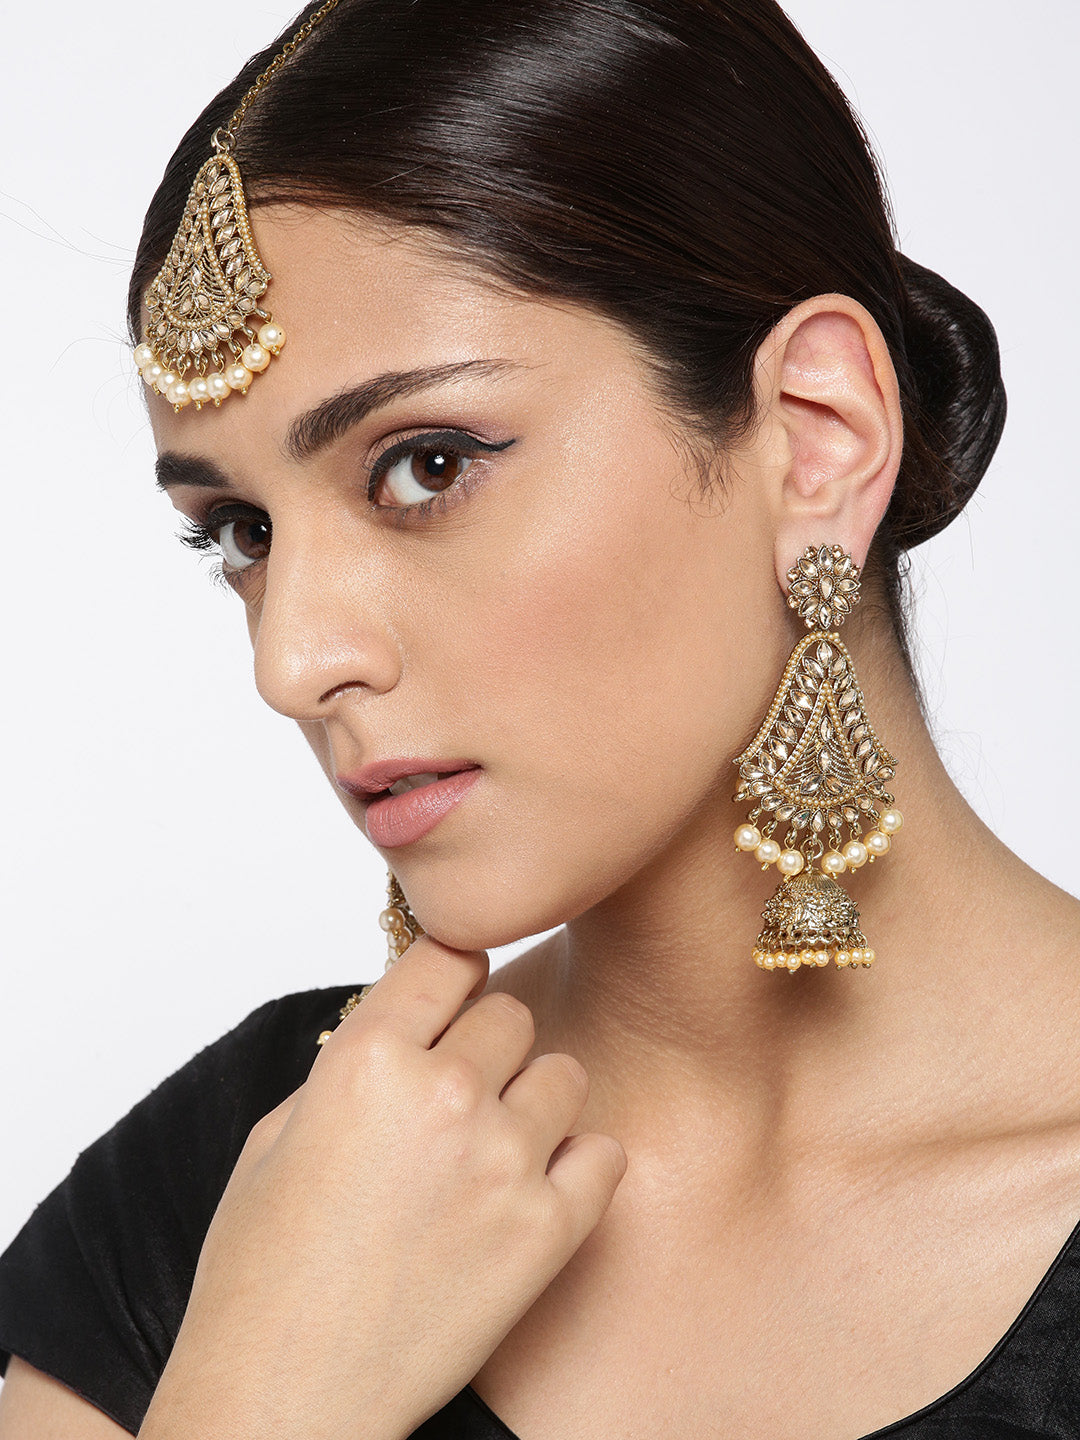 Gold-Plated Stone Studded MaangTikka And Earrings Set with Pearls Drop